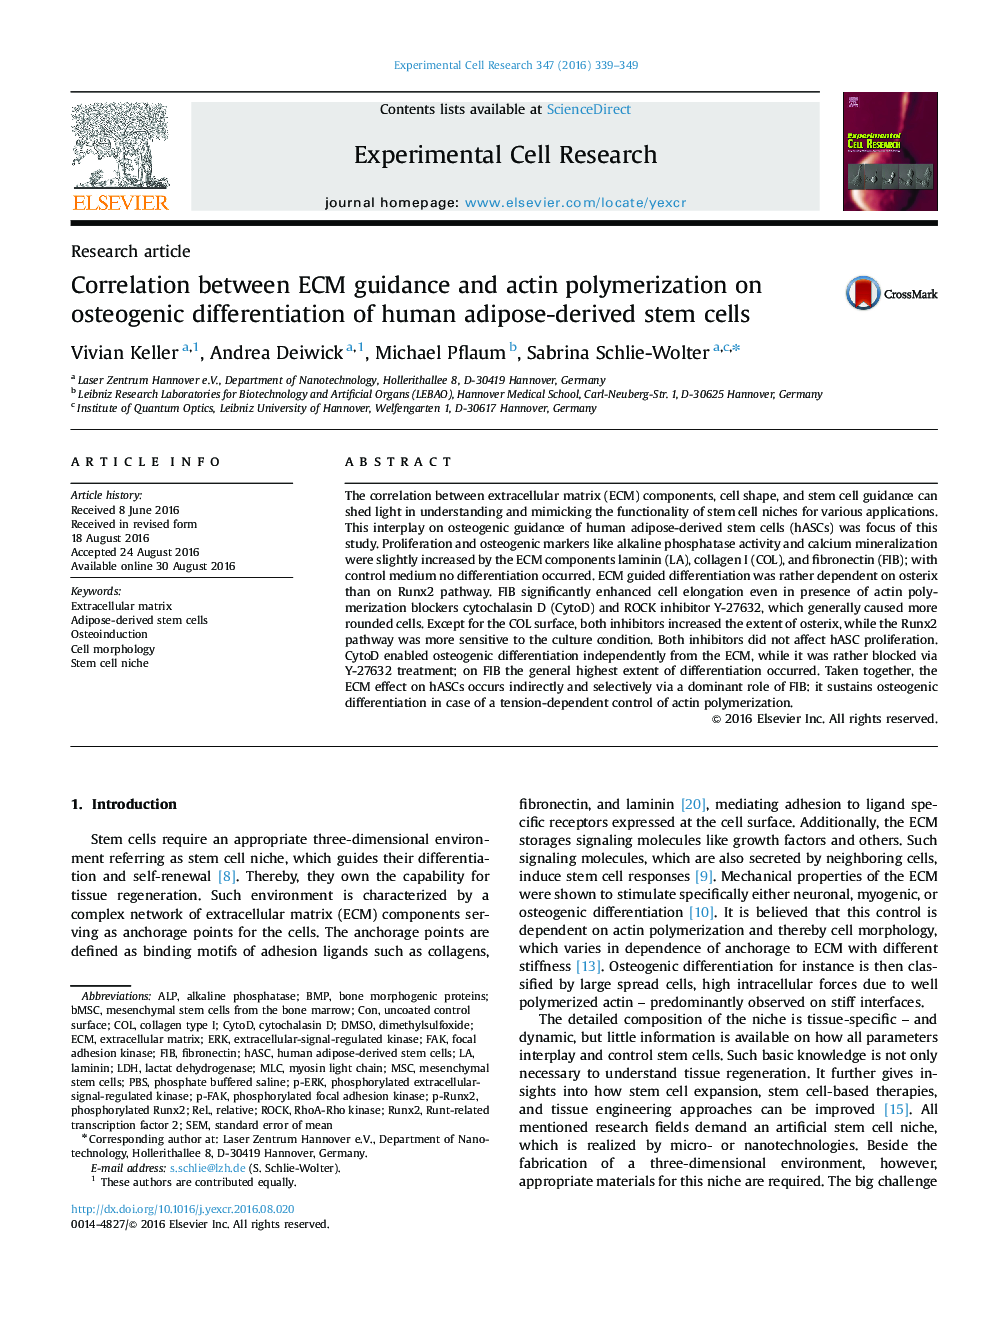 Research articleCorrelation between ECM guidance and actin polymerization on osteogenic differentiation of human adipose-derived stem cells